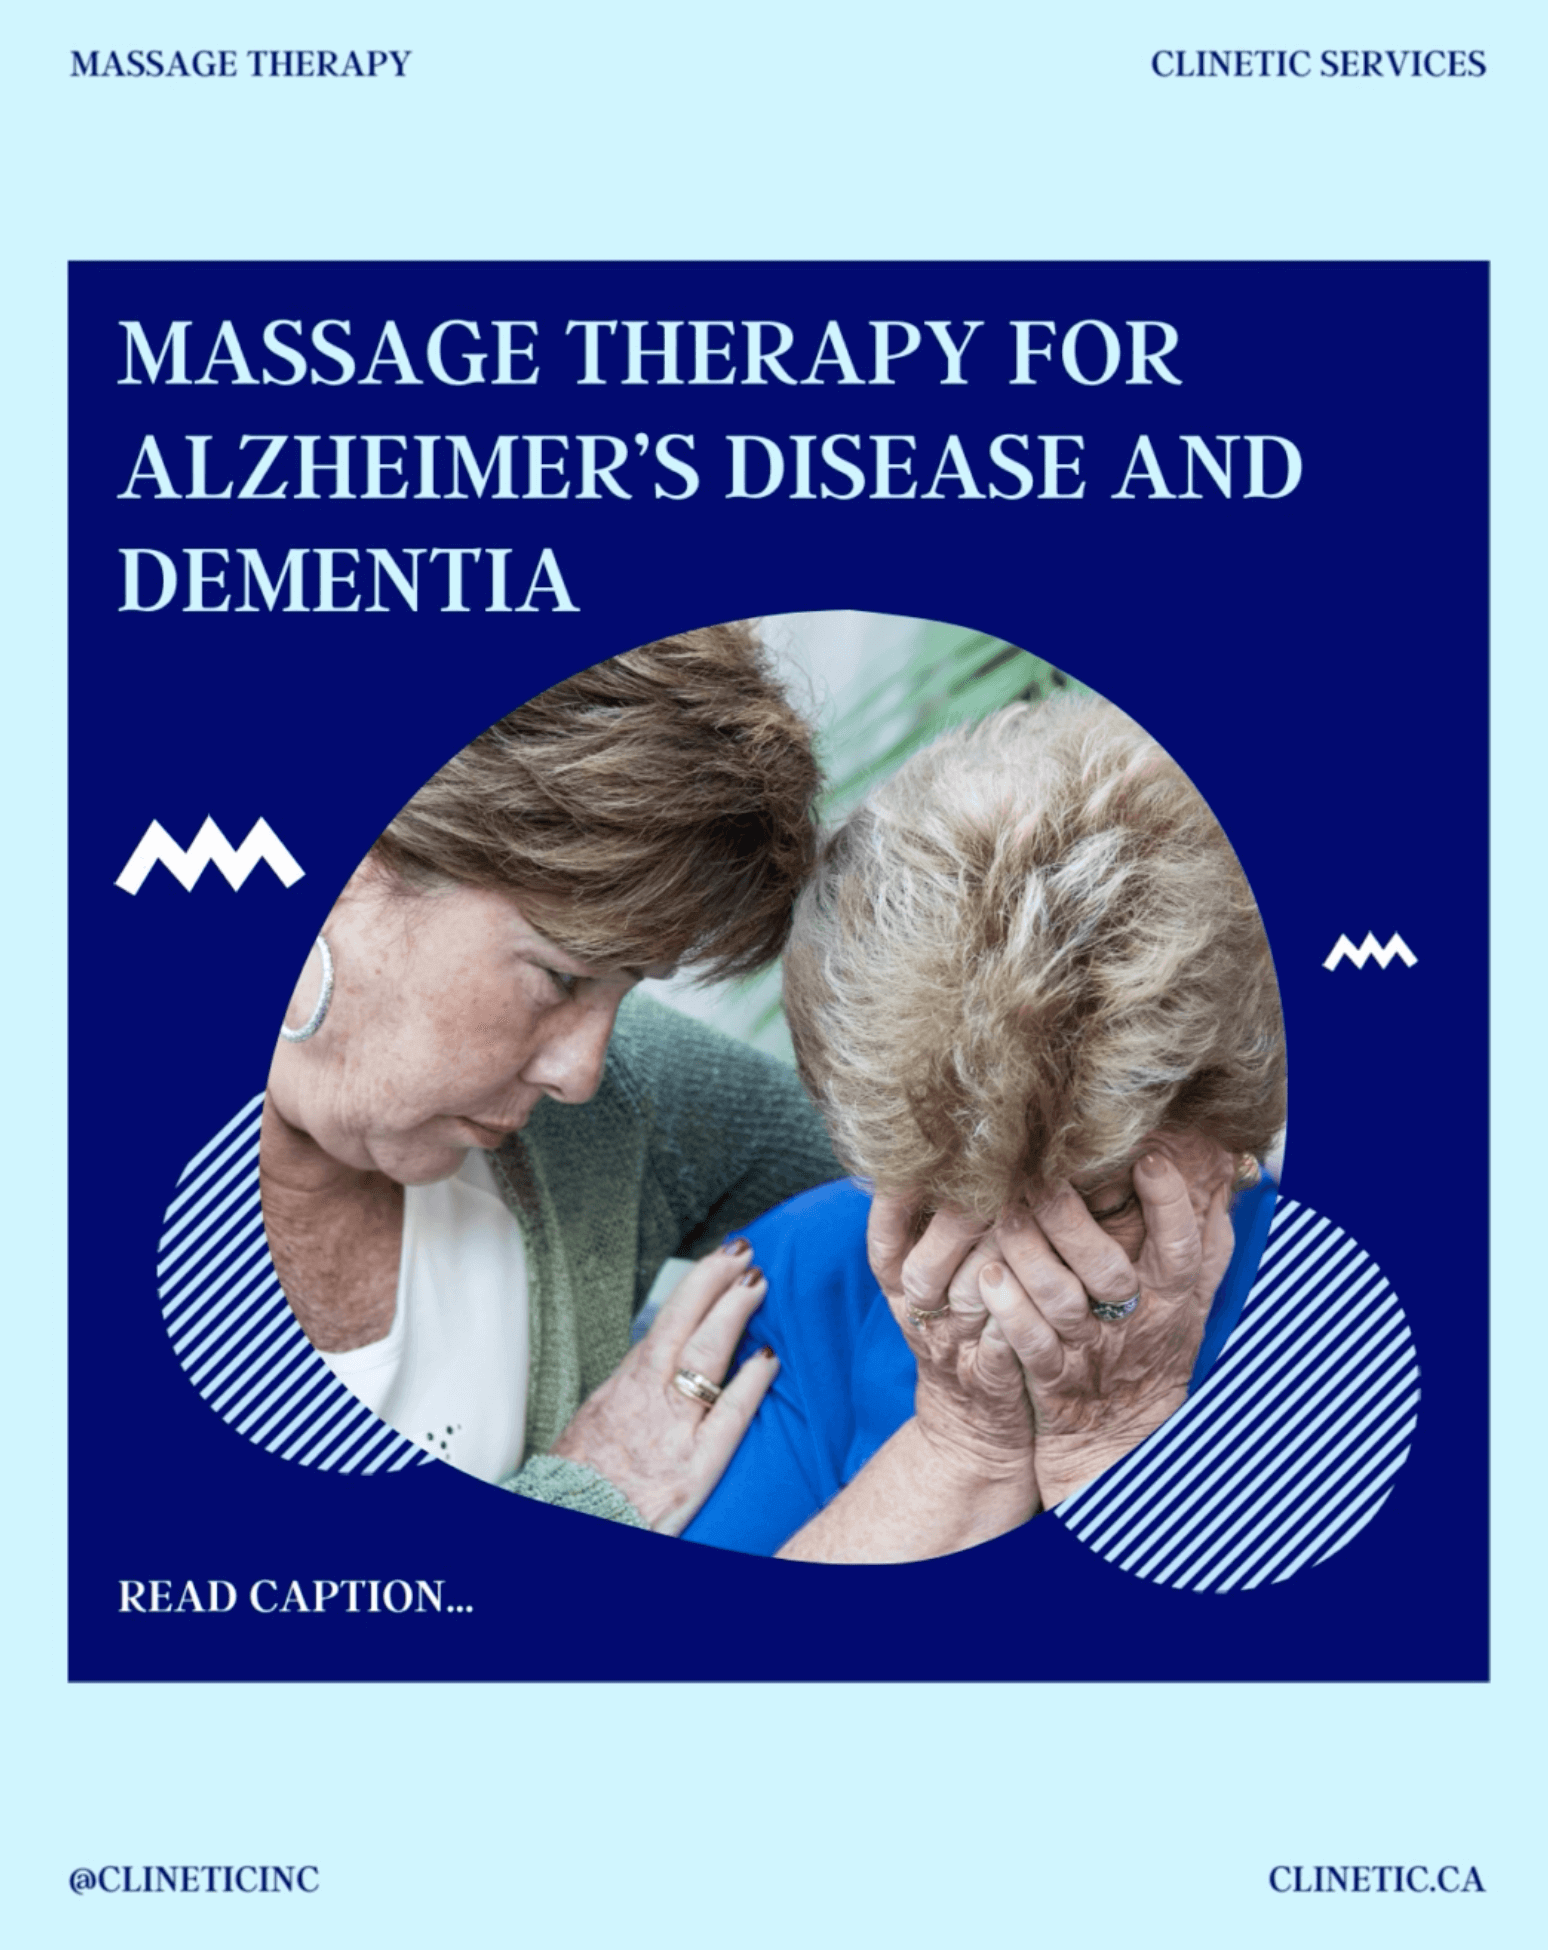 Massage Therapy for Alzheimer’s Disease and Dementia